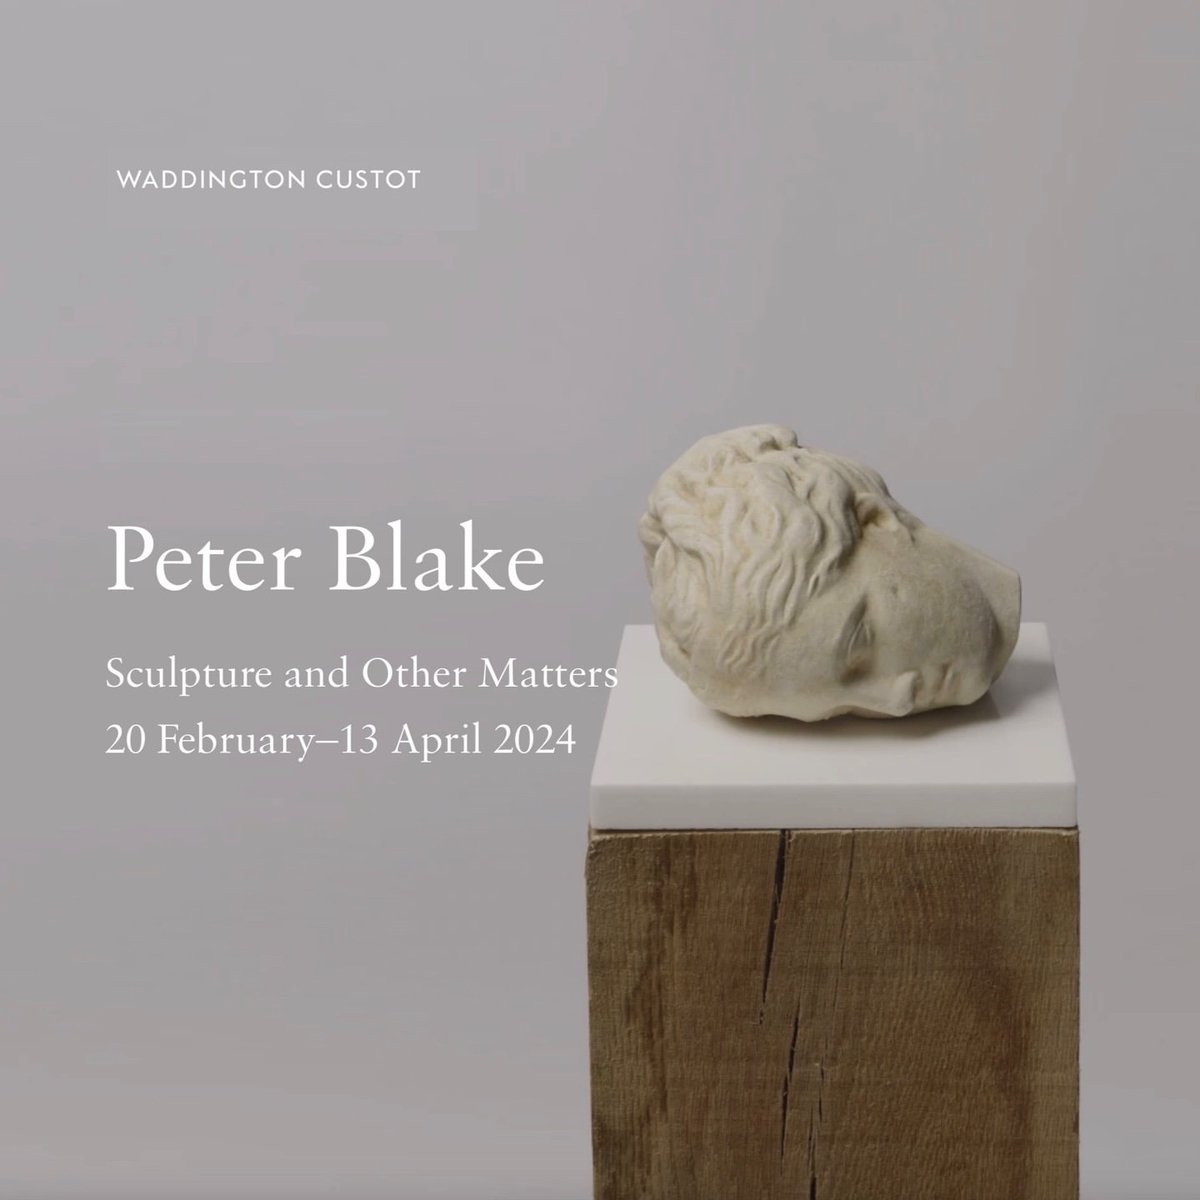 'A souvenir for Barry Flanagan, my neighbour at the 1977 Hayward Annual' Peter Blake. Visit Waddington Custot now to see the brilliant Peter Blake: Sculptures and Other Matters exhibition, running until 13th April. Blake's first solo exhibition of sculpture in over 20 years.